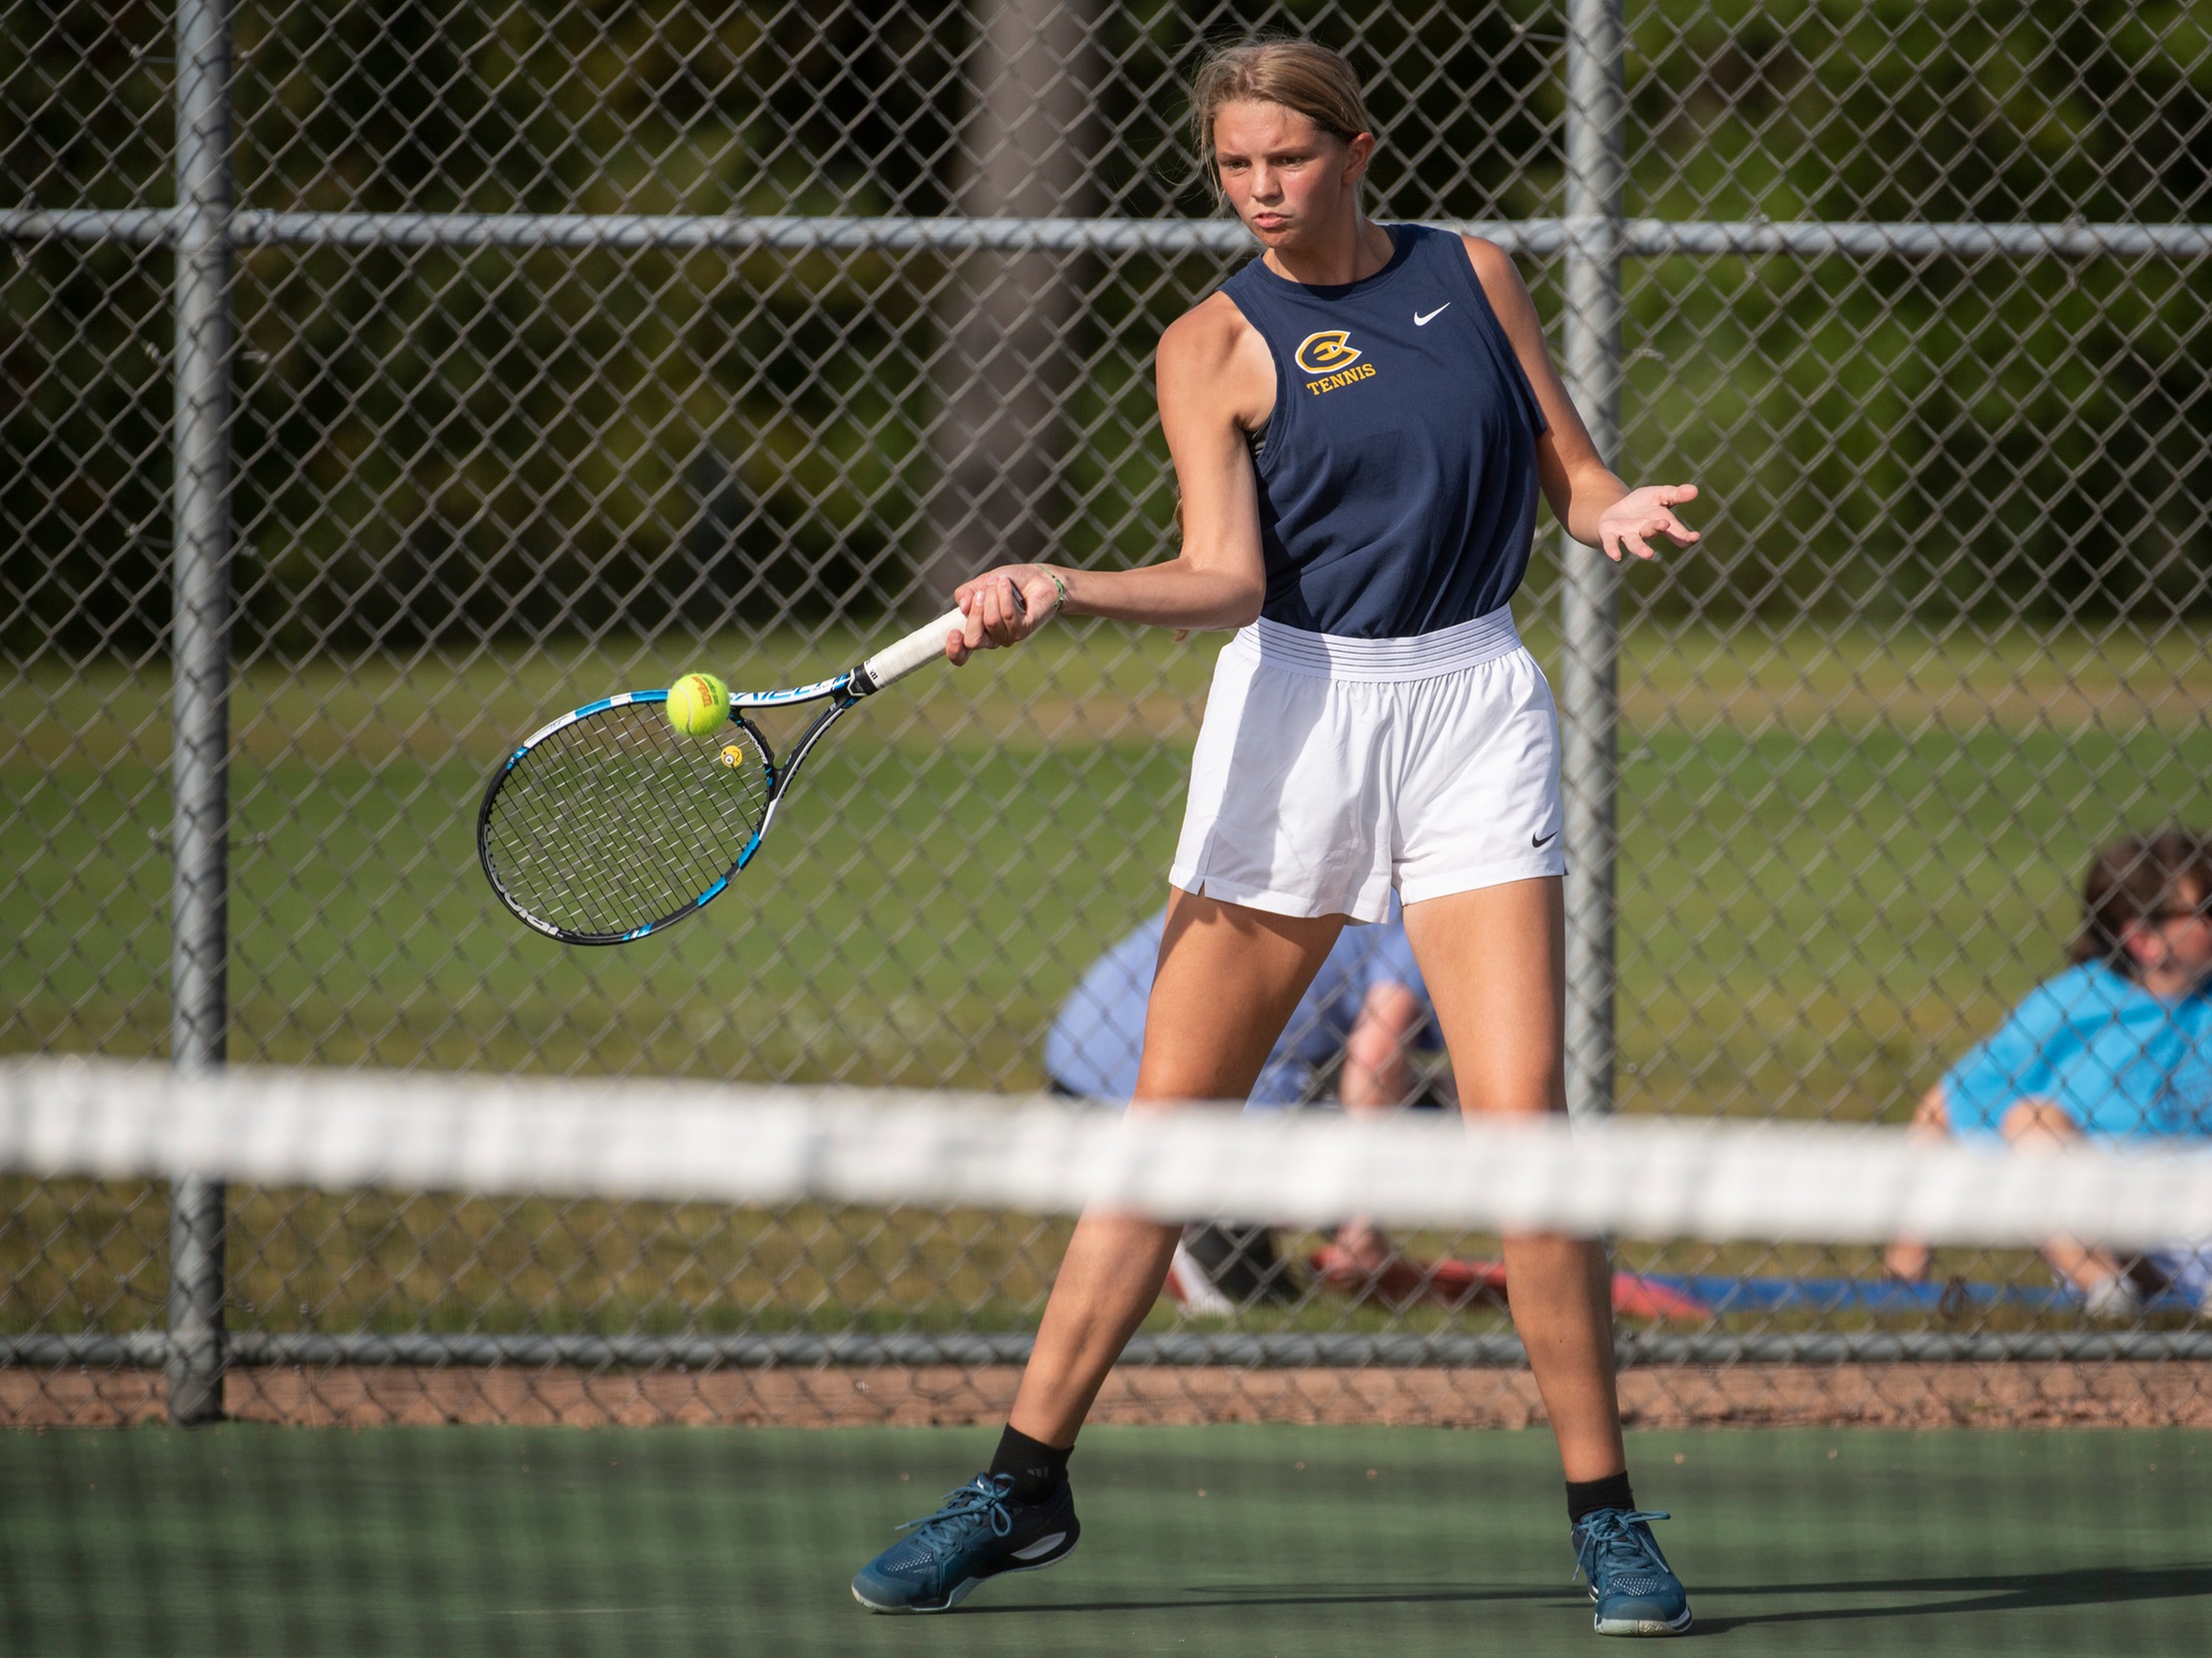 Women's Tennis Improves to 4-1 with WIAC Win Over Eagles